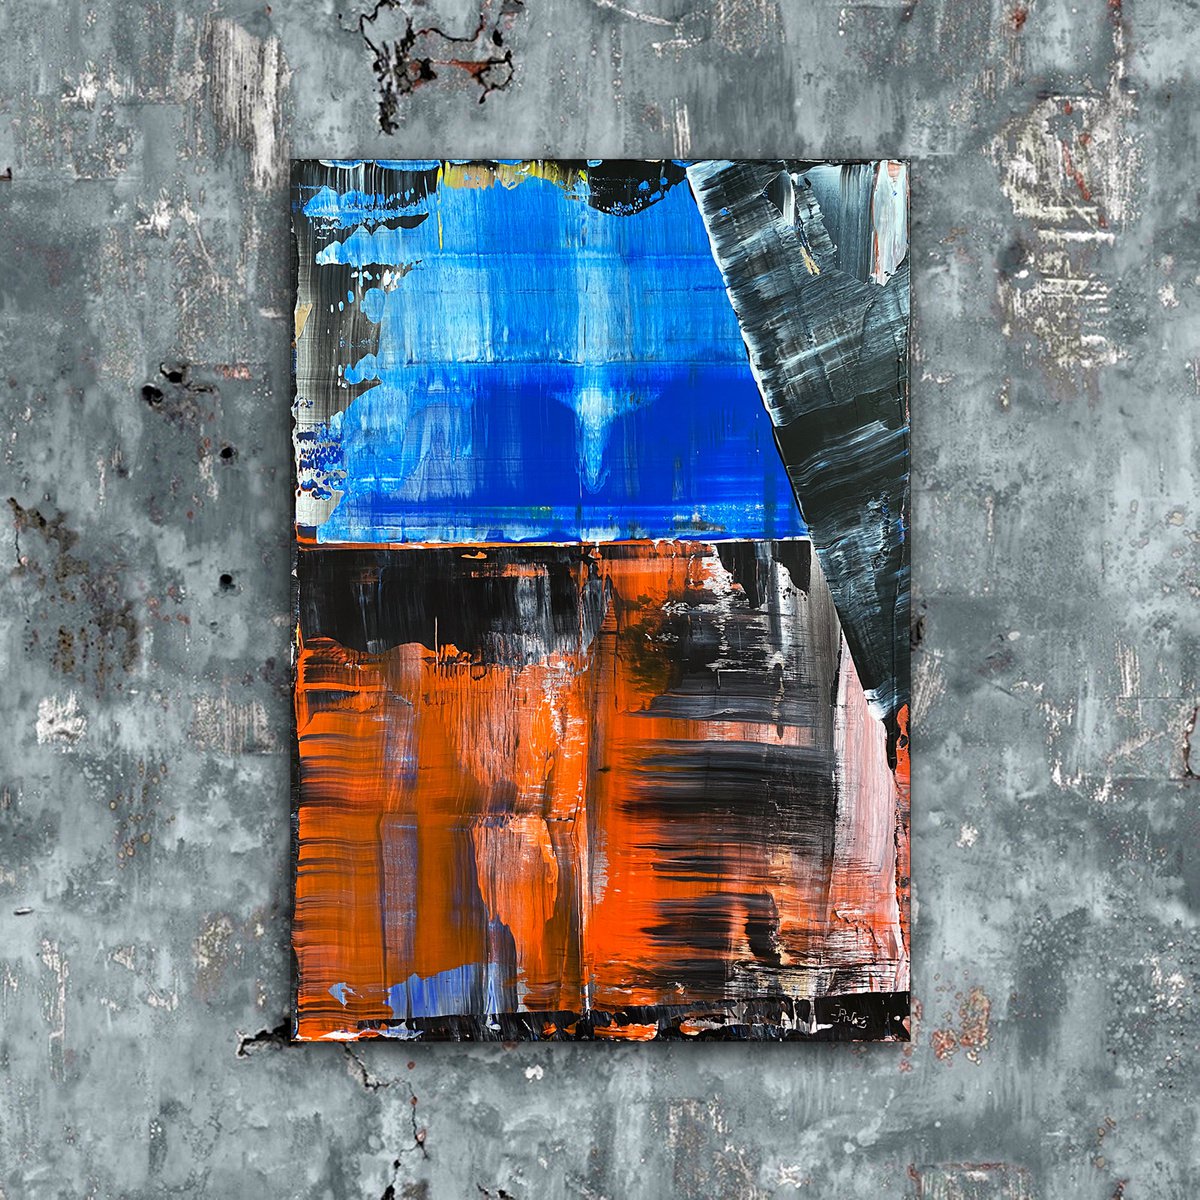 Hold It In - Original PMS Abstract Acrylic Painting On Reclaimed Wood Panel - 17.25 x 2... by Preston M. Smith (PMS)